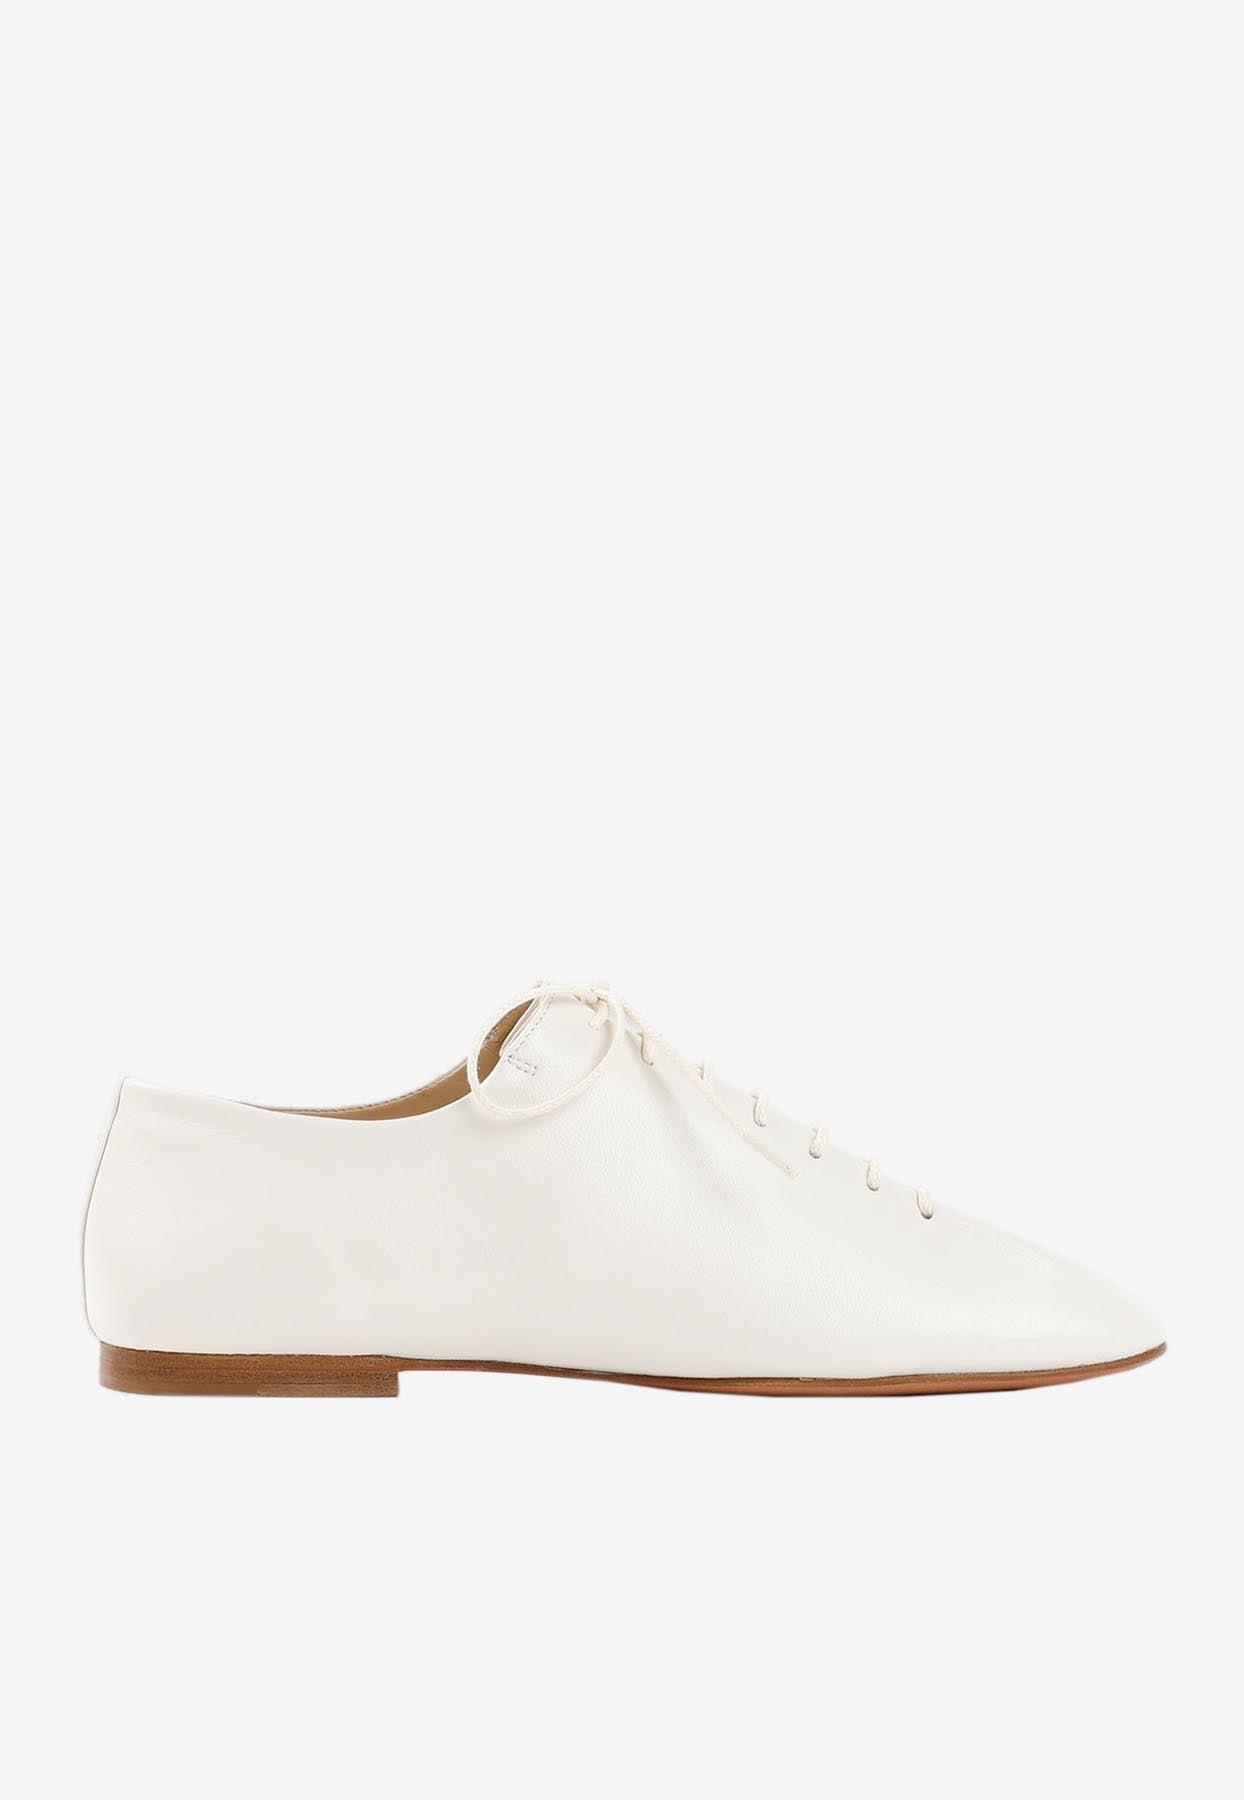 Lemaire Souris Flat Classic Derbies In Nappa Leather in White | Lyst